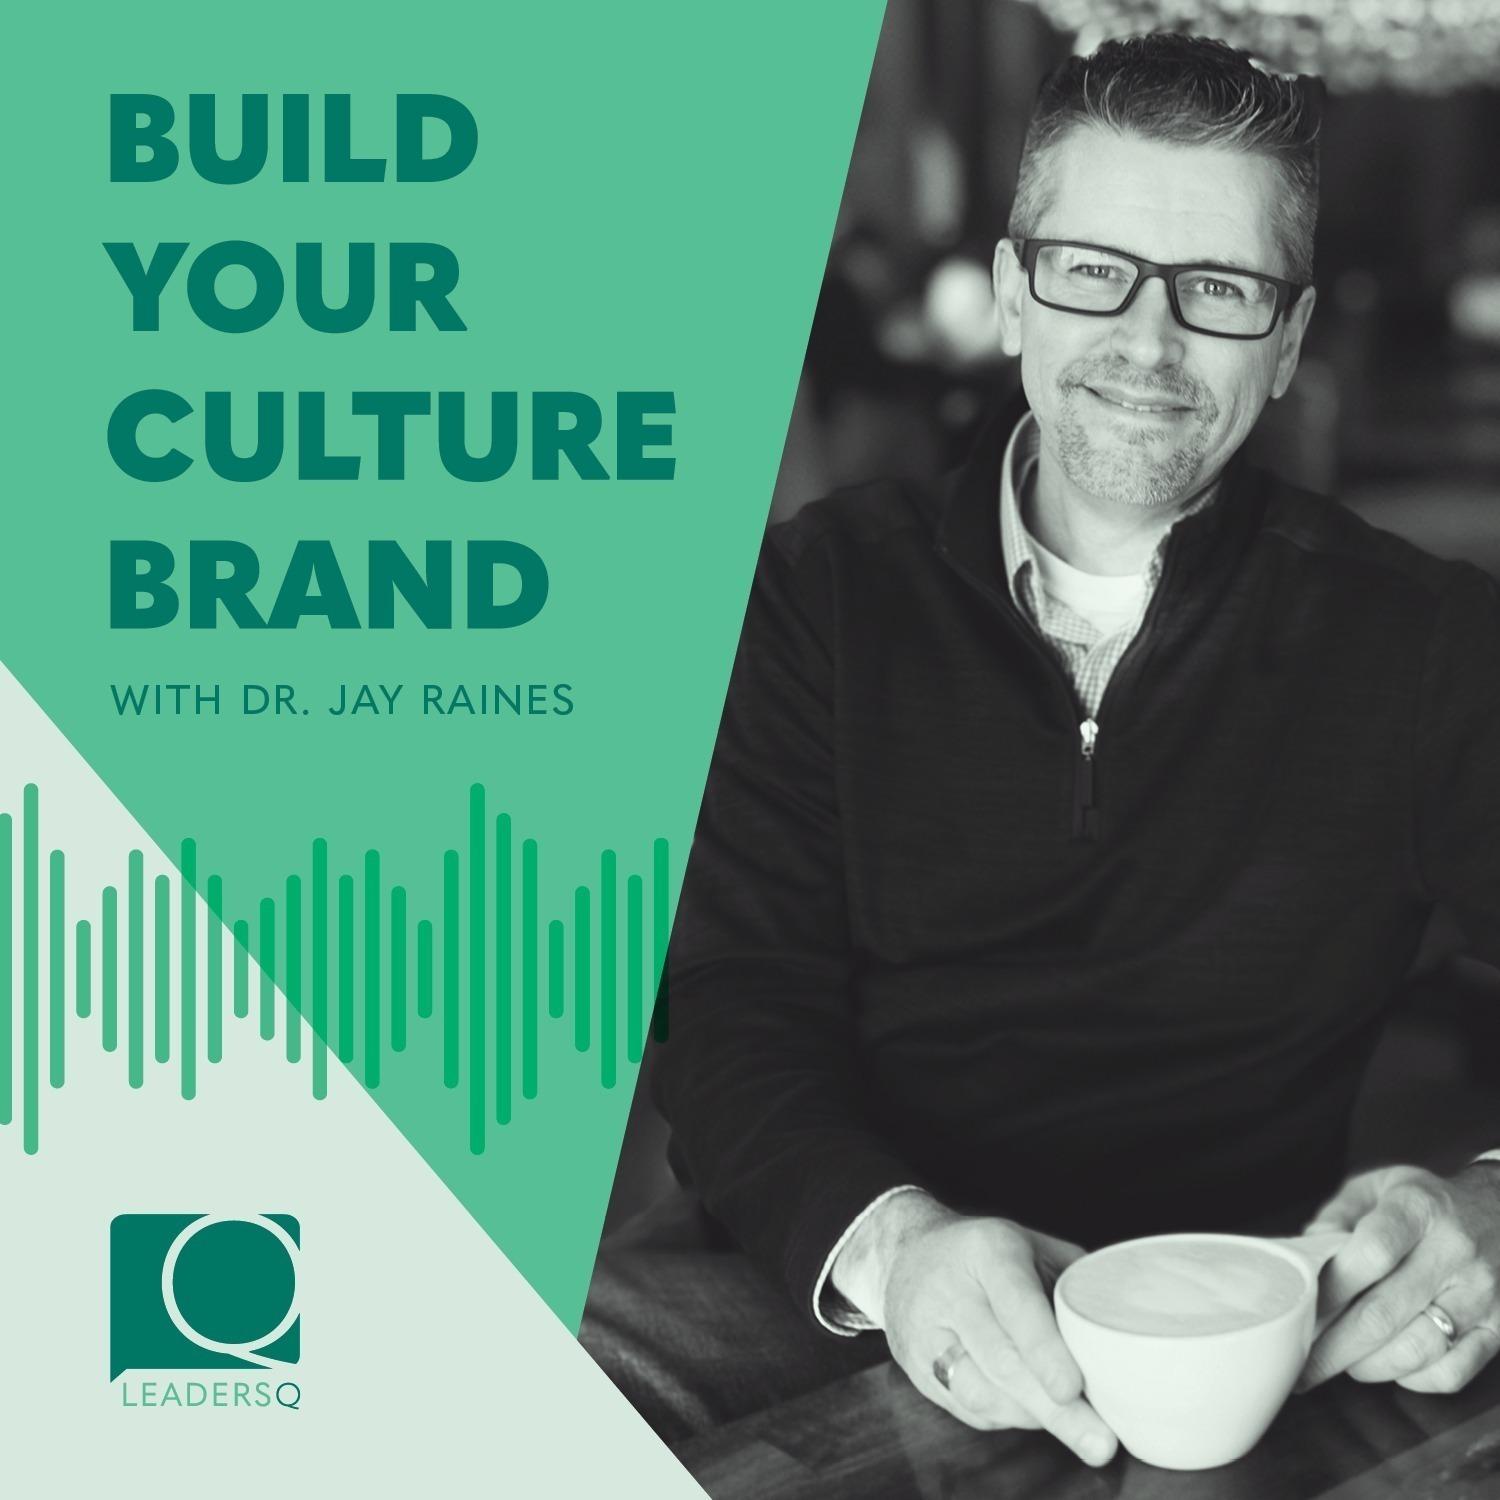 Build Your Culture Brand with Dr. Jay Raines